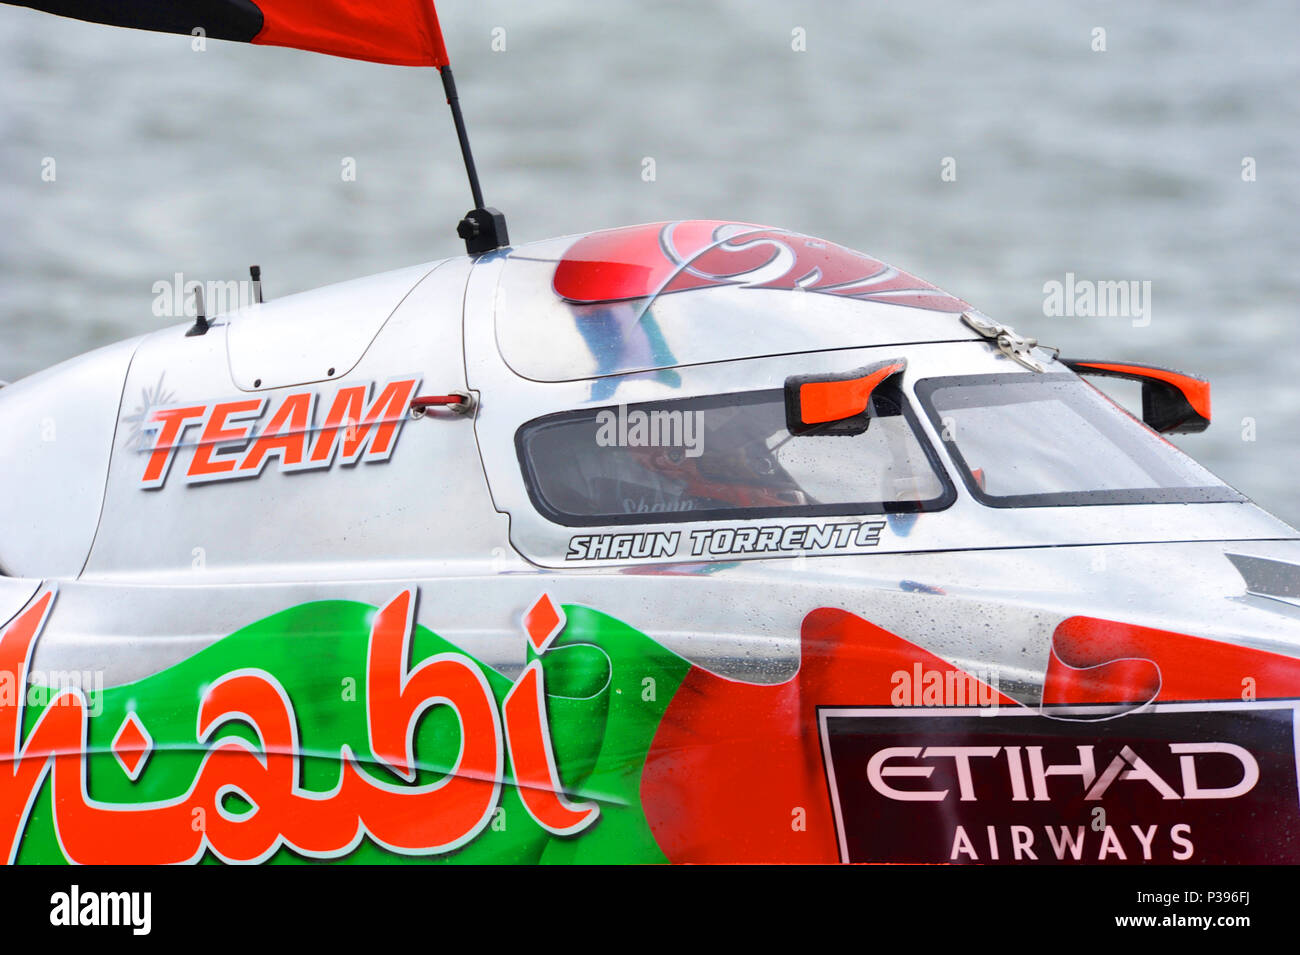 London, UK. 17th June, 2018. Shaun Torrente (USA, Team Abu Dhabi) on a parade lap shortly before the start of the UIM F1H2O London Grand Prix, part of the UIM F1H2O World Championship event at Royal Victoria Dock, London, UK.  The UIM F1H2O World Championship is a series of international powerboat racing events, featuring single-seater, enclosed cockpit, catamarans which race around an inshore circuit of around 2km at speeds of up to 136mph/220kmh. Credit: Michael Preston/Alamy Live News Stock Photo